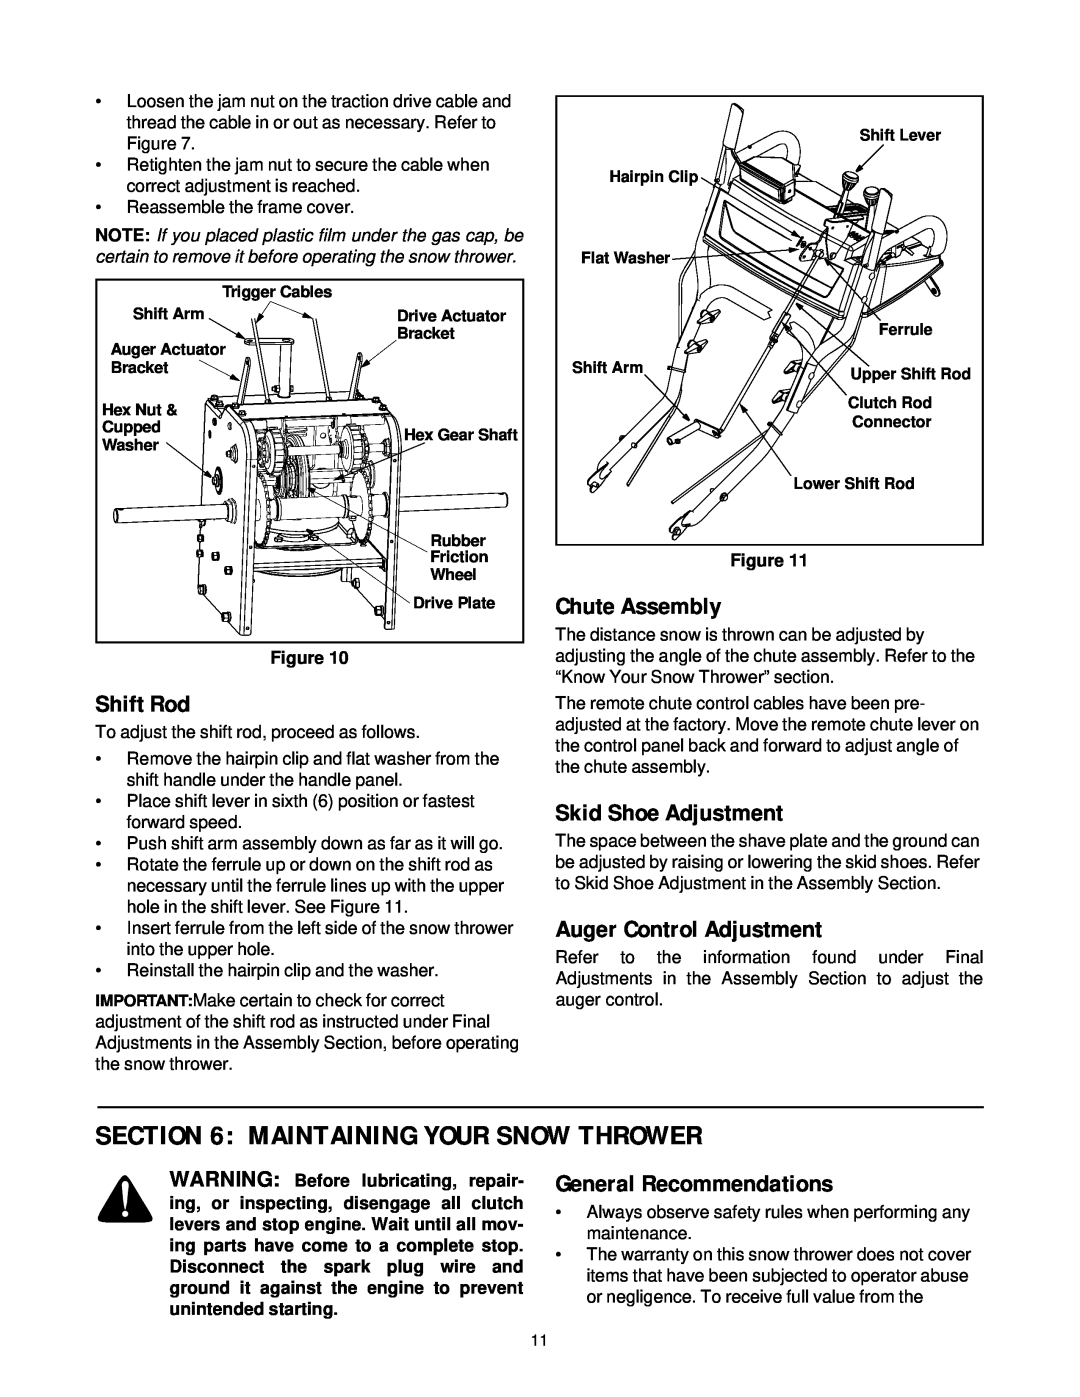 Yard-Man 31AE993J401 manual Maintaining Your Snow Thrower, Shift Rod, Chute Assembly, Skid Shoe Adjustment 